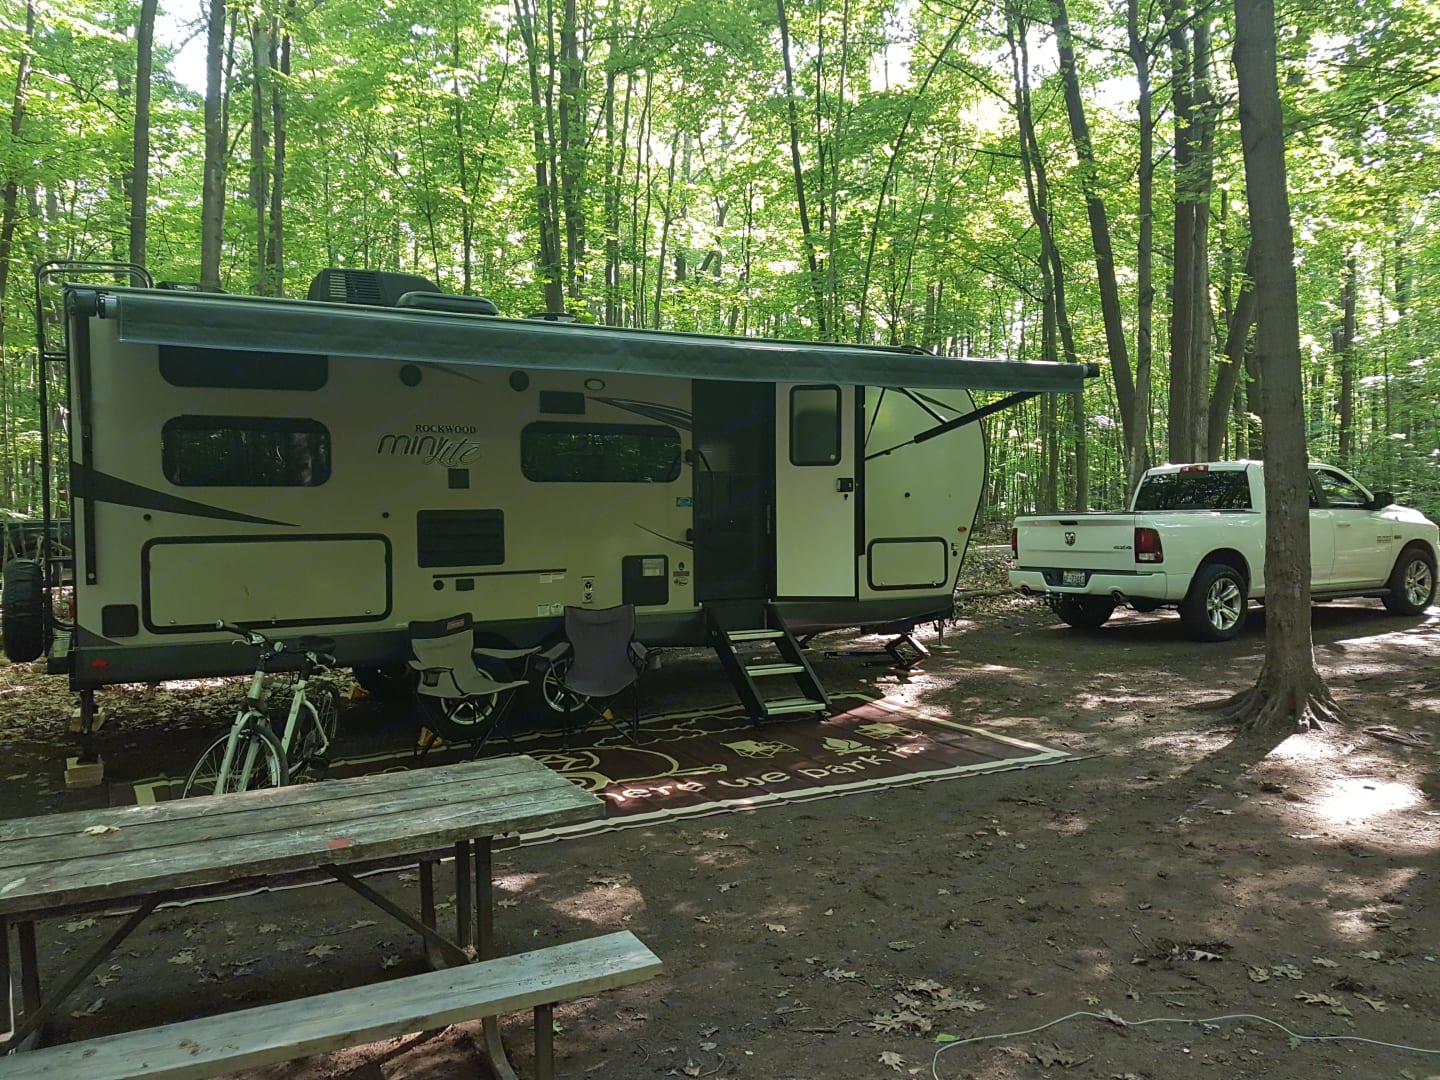 Travel trailer in wooded campsite